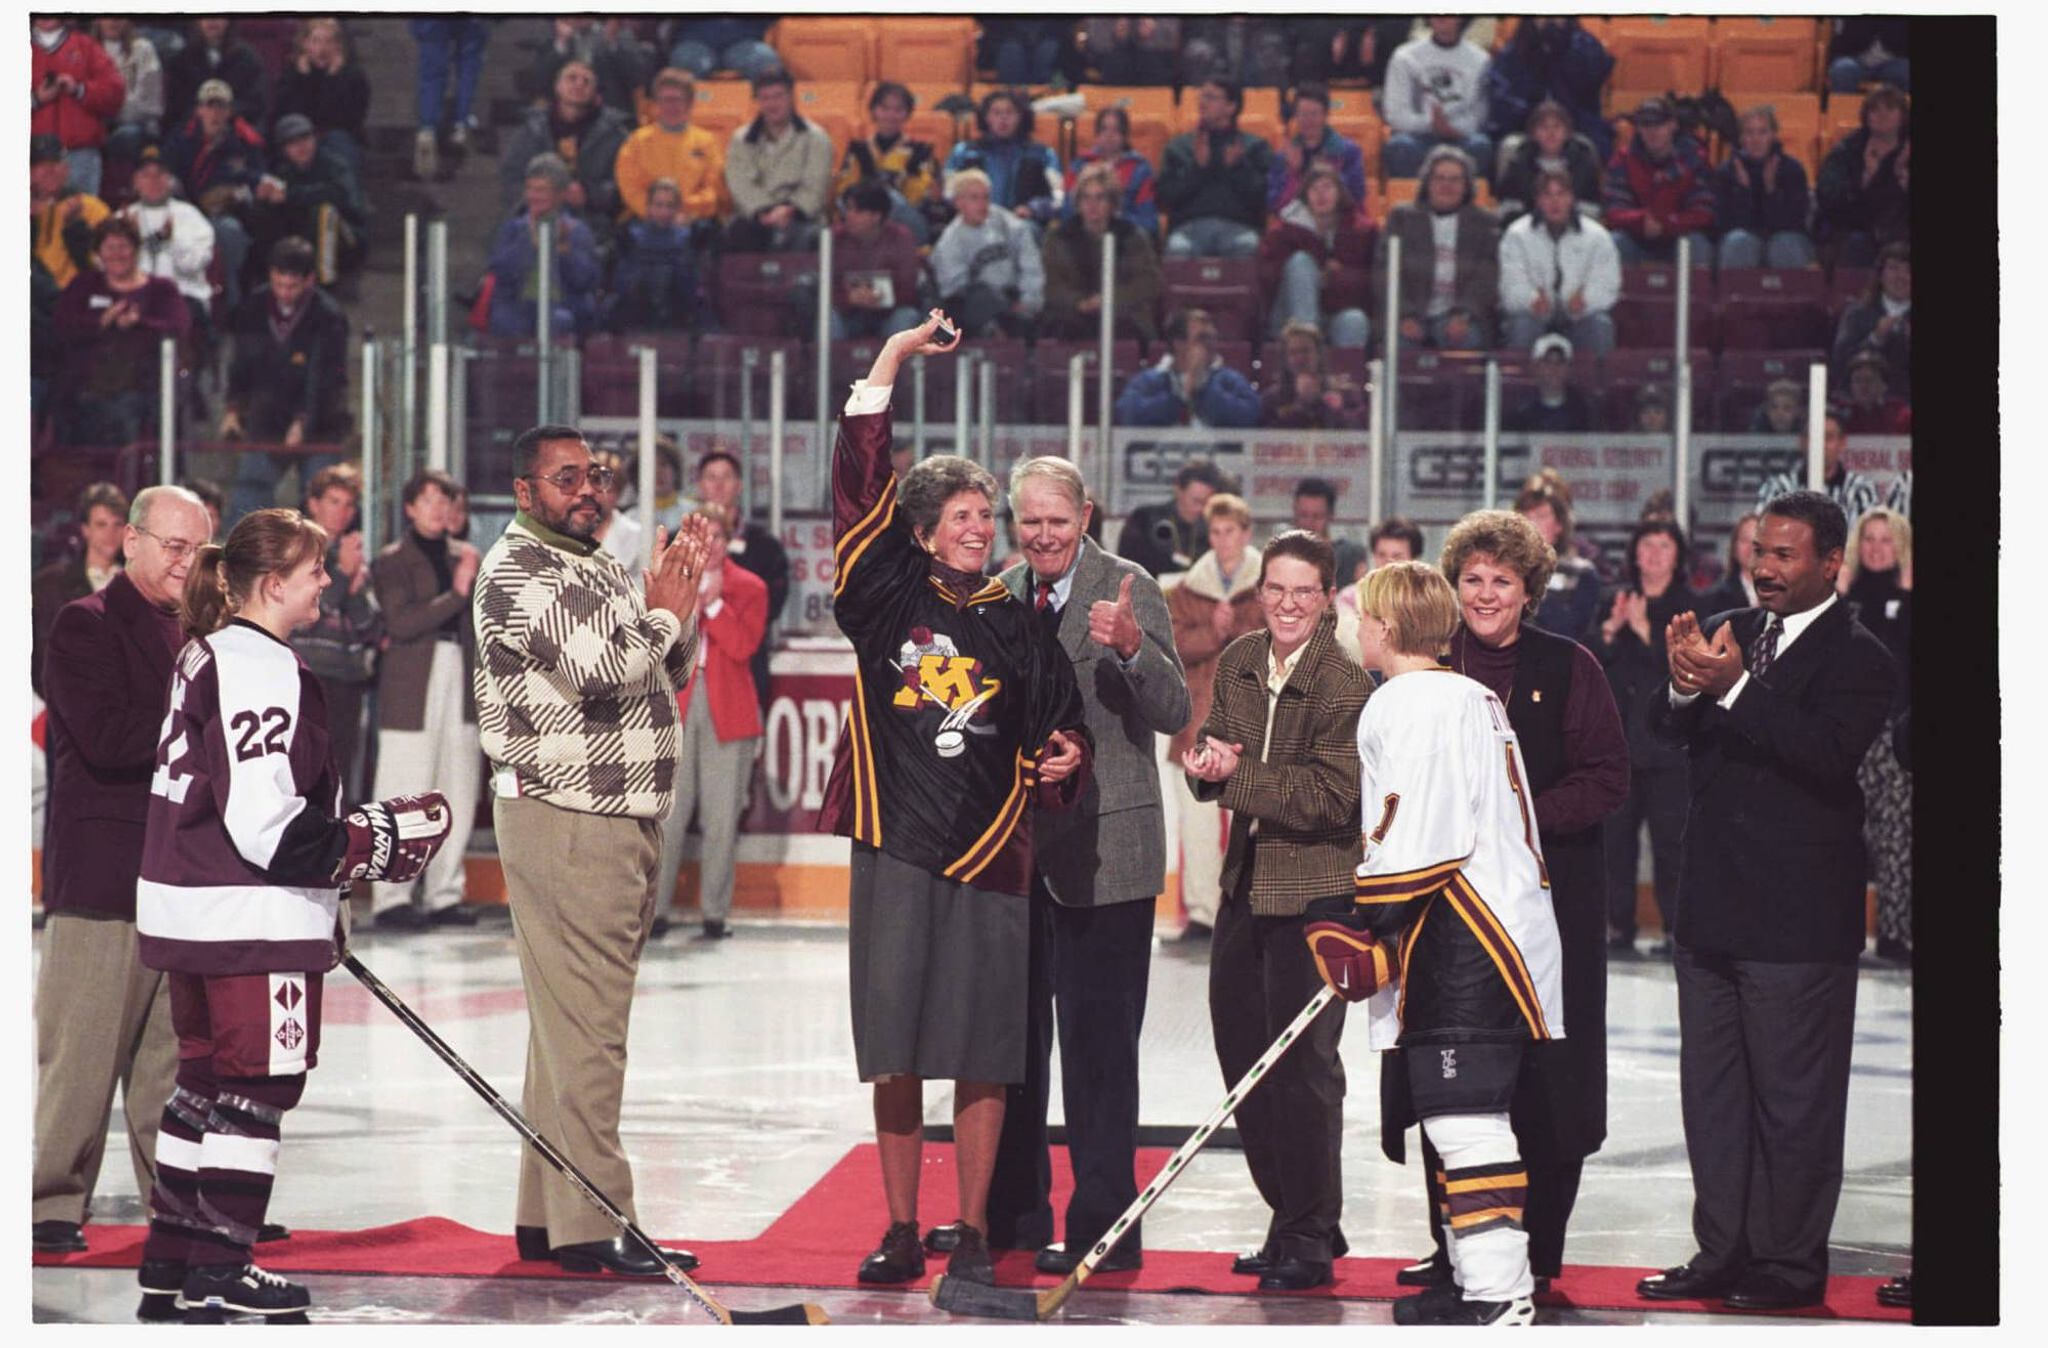 Kathleen Ridder drops the ceremonial first puck | Image courtesy of gophersports.com